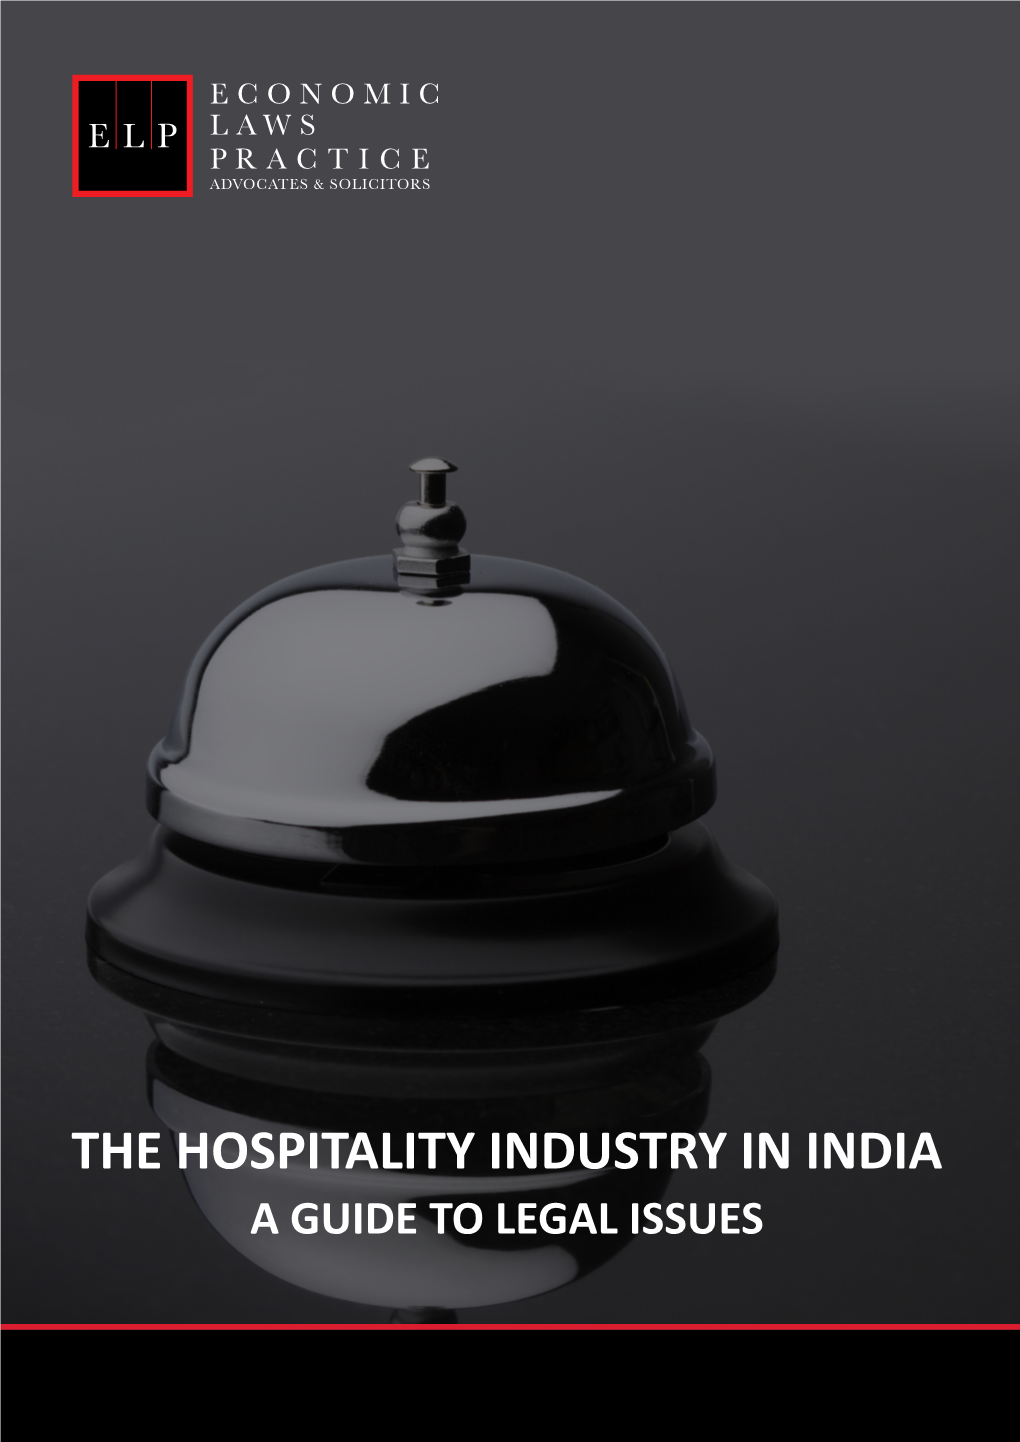 The Hospitality Industry in India a Guide to Legal Issues